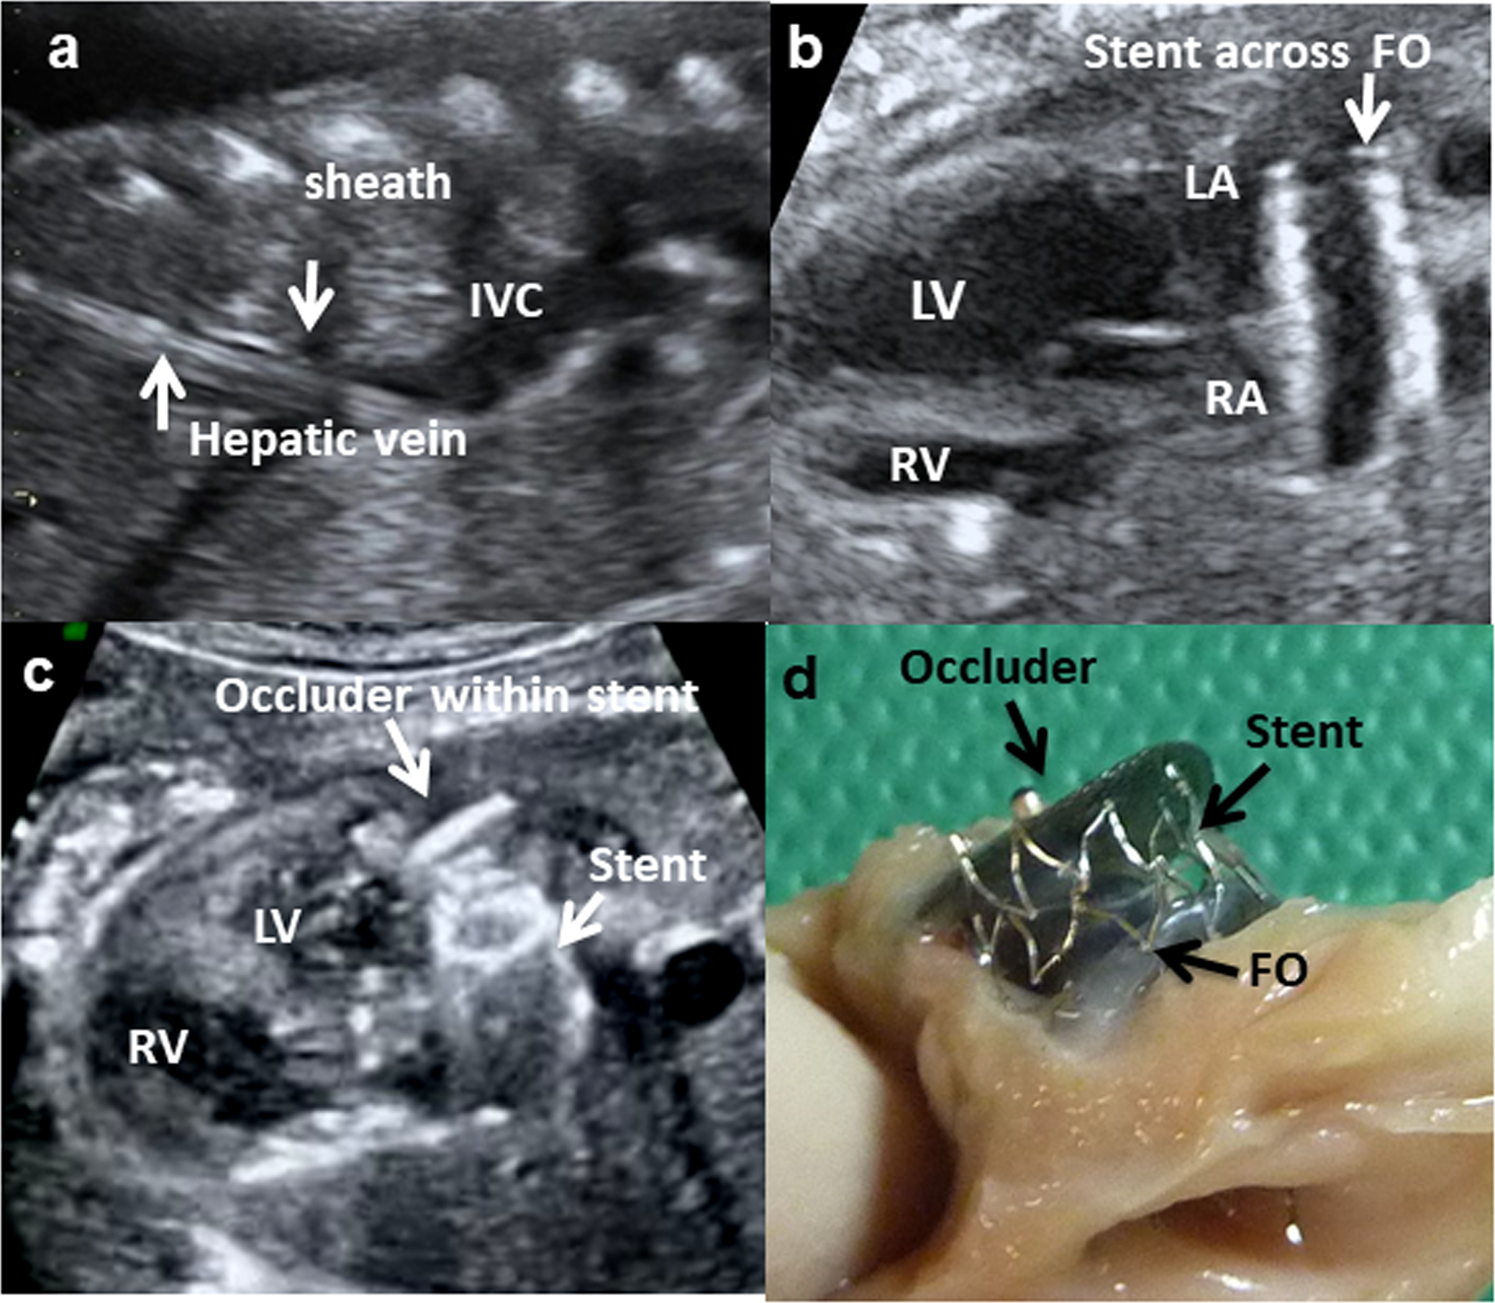 Induction of left ventricular hypoplasia by occluding the foramen ovale in  the fetal lamb | Scientific Reports